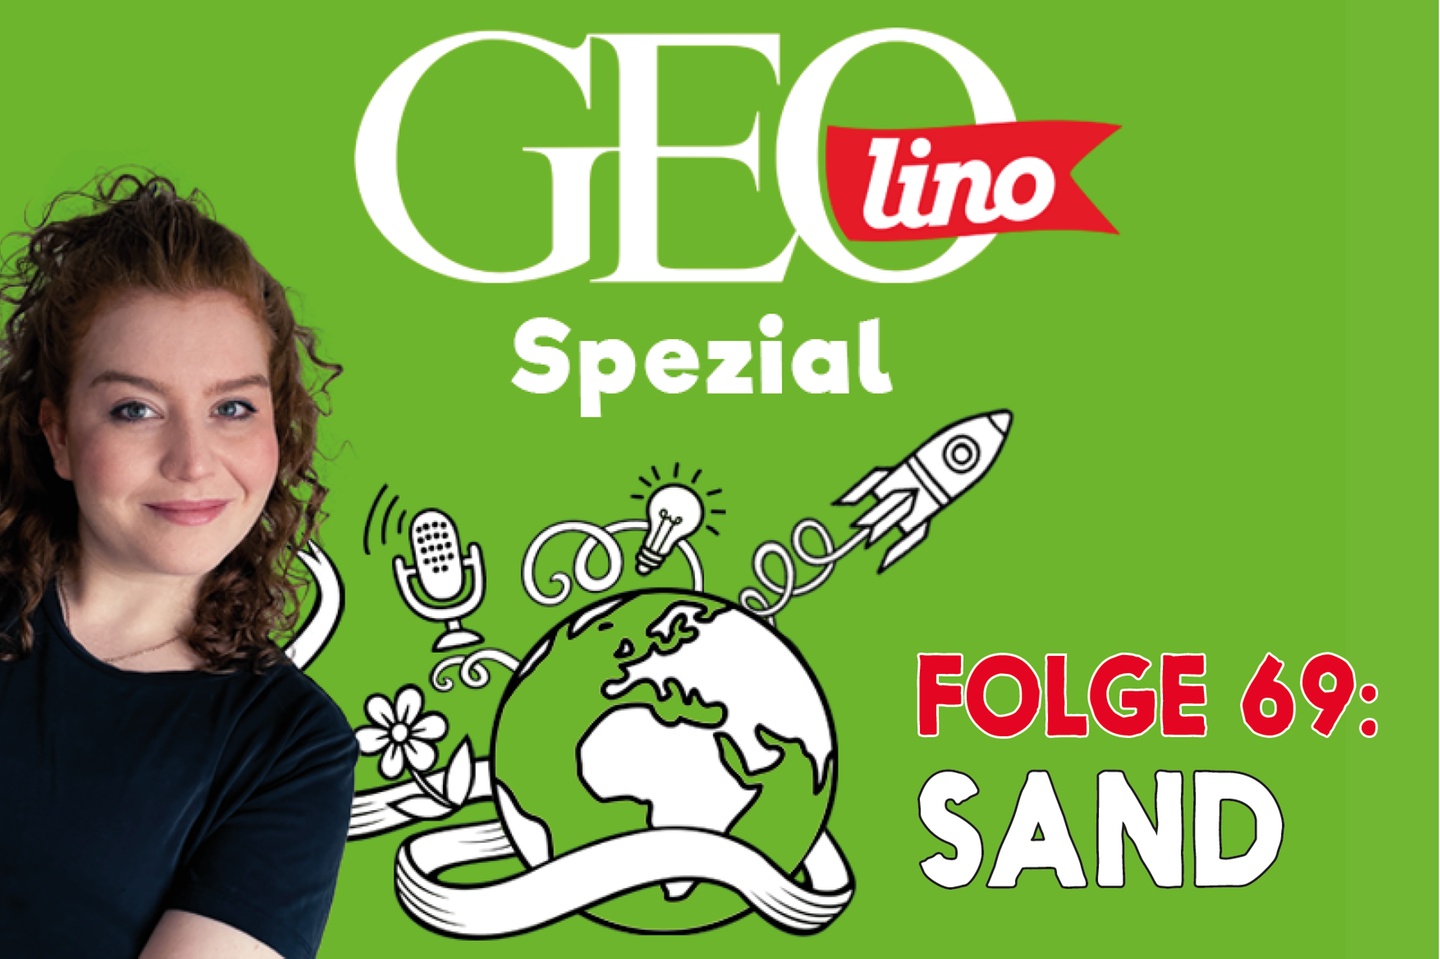 In Folge 69 unseres GEOlino-Podcasts geht's um Sand